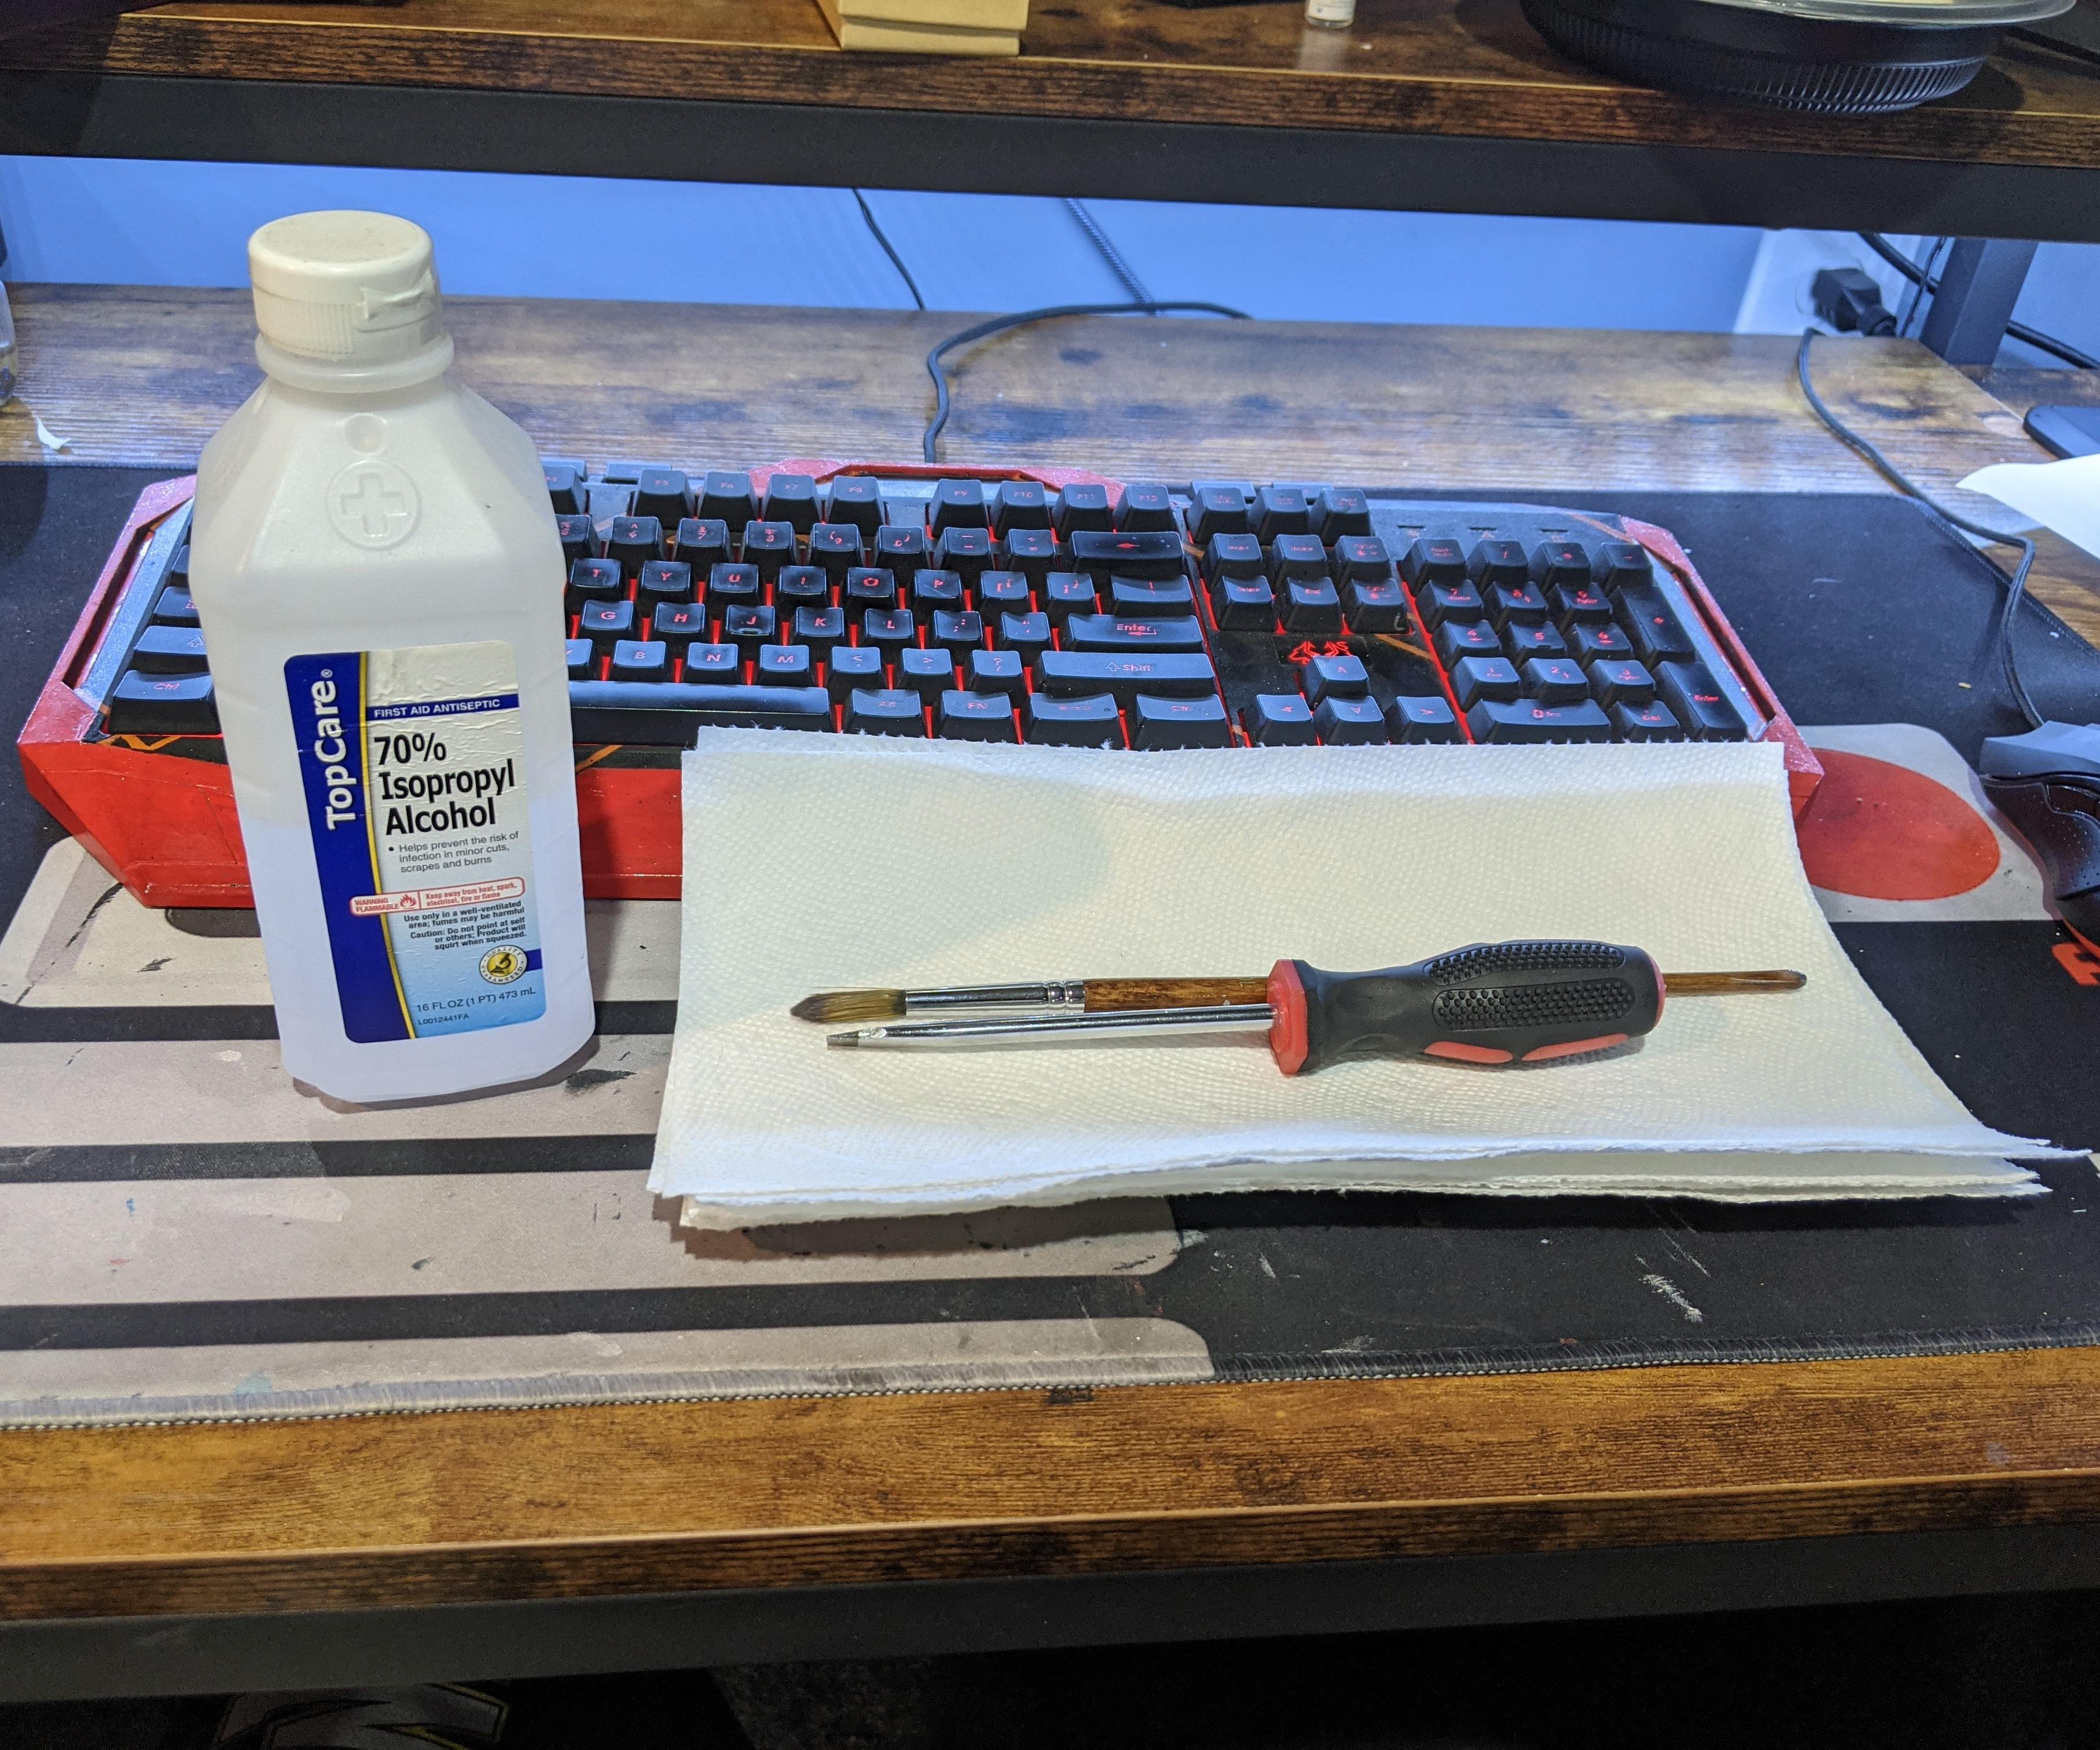 How to Properly Clean a Keyboard